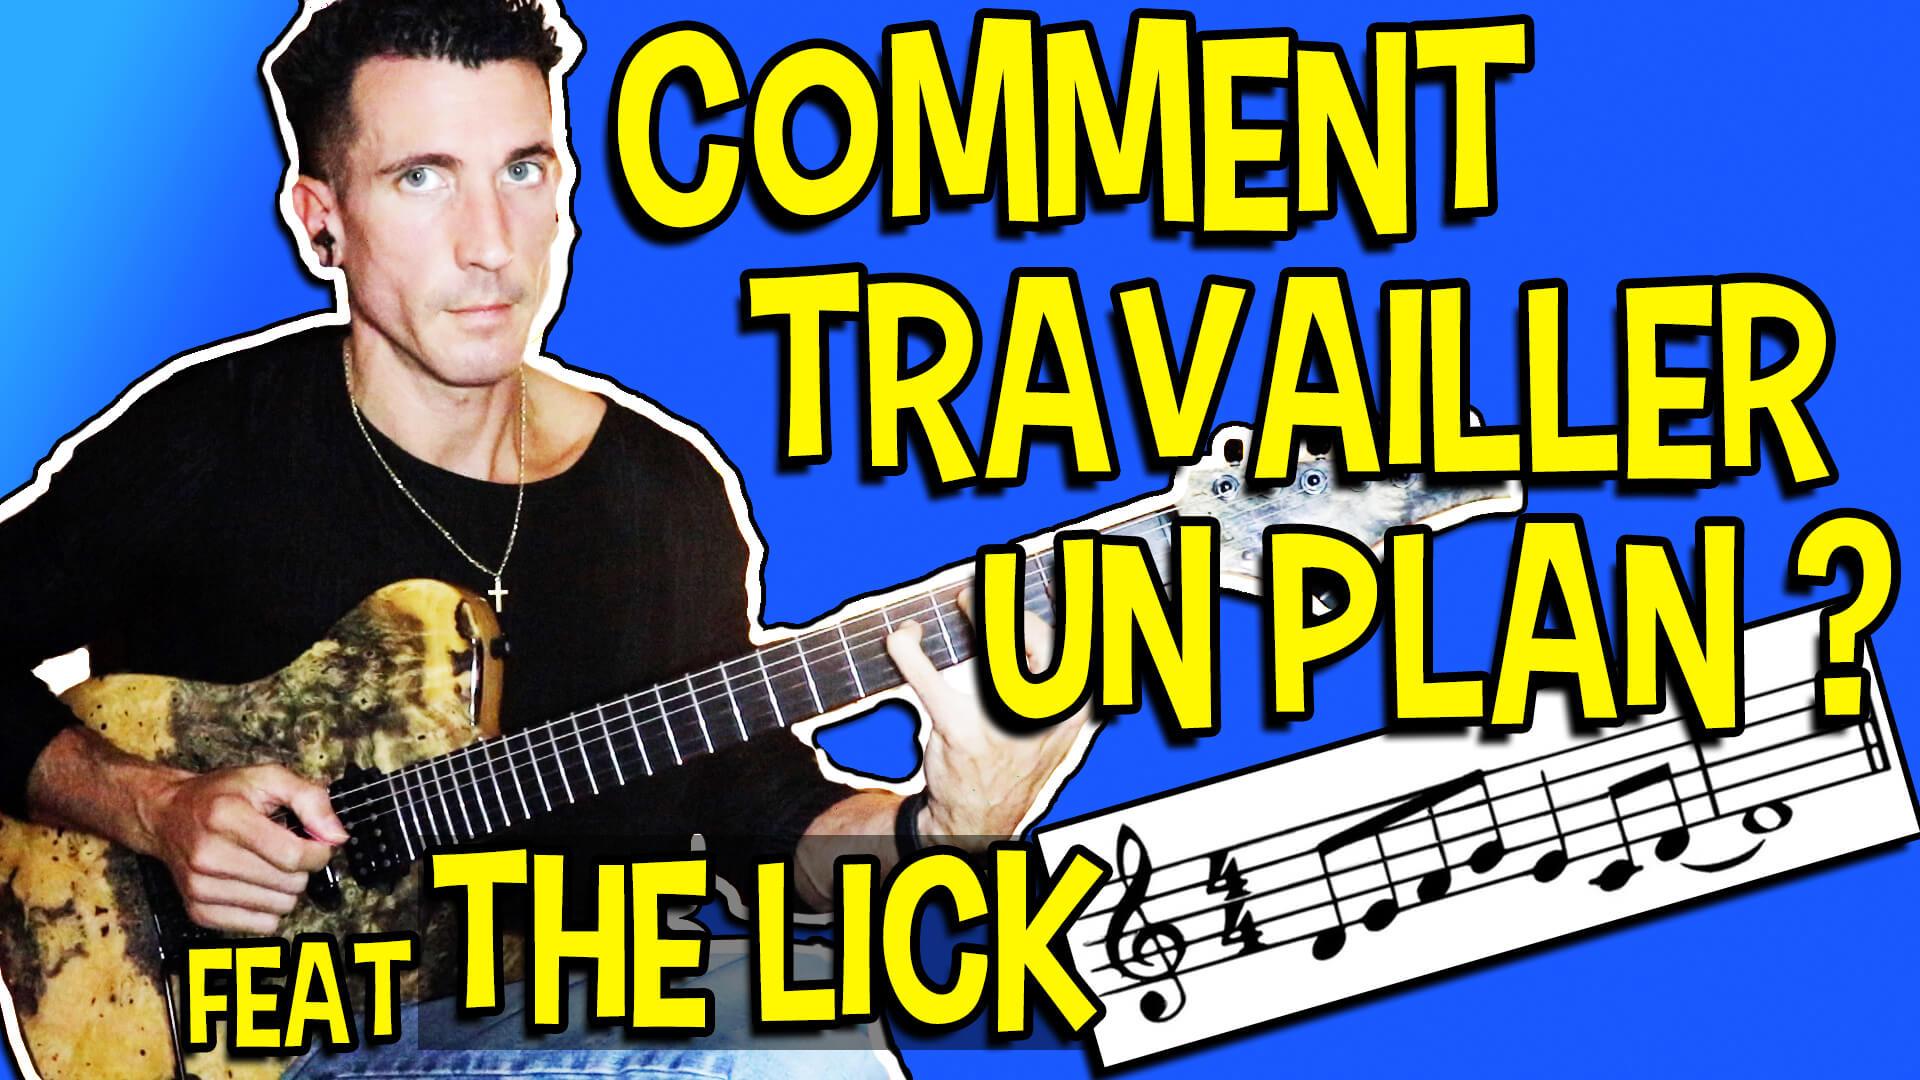 The lick 1 